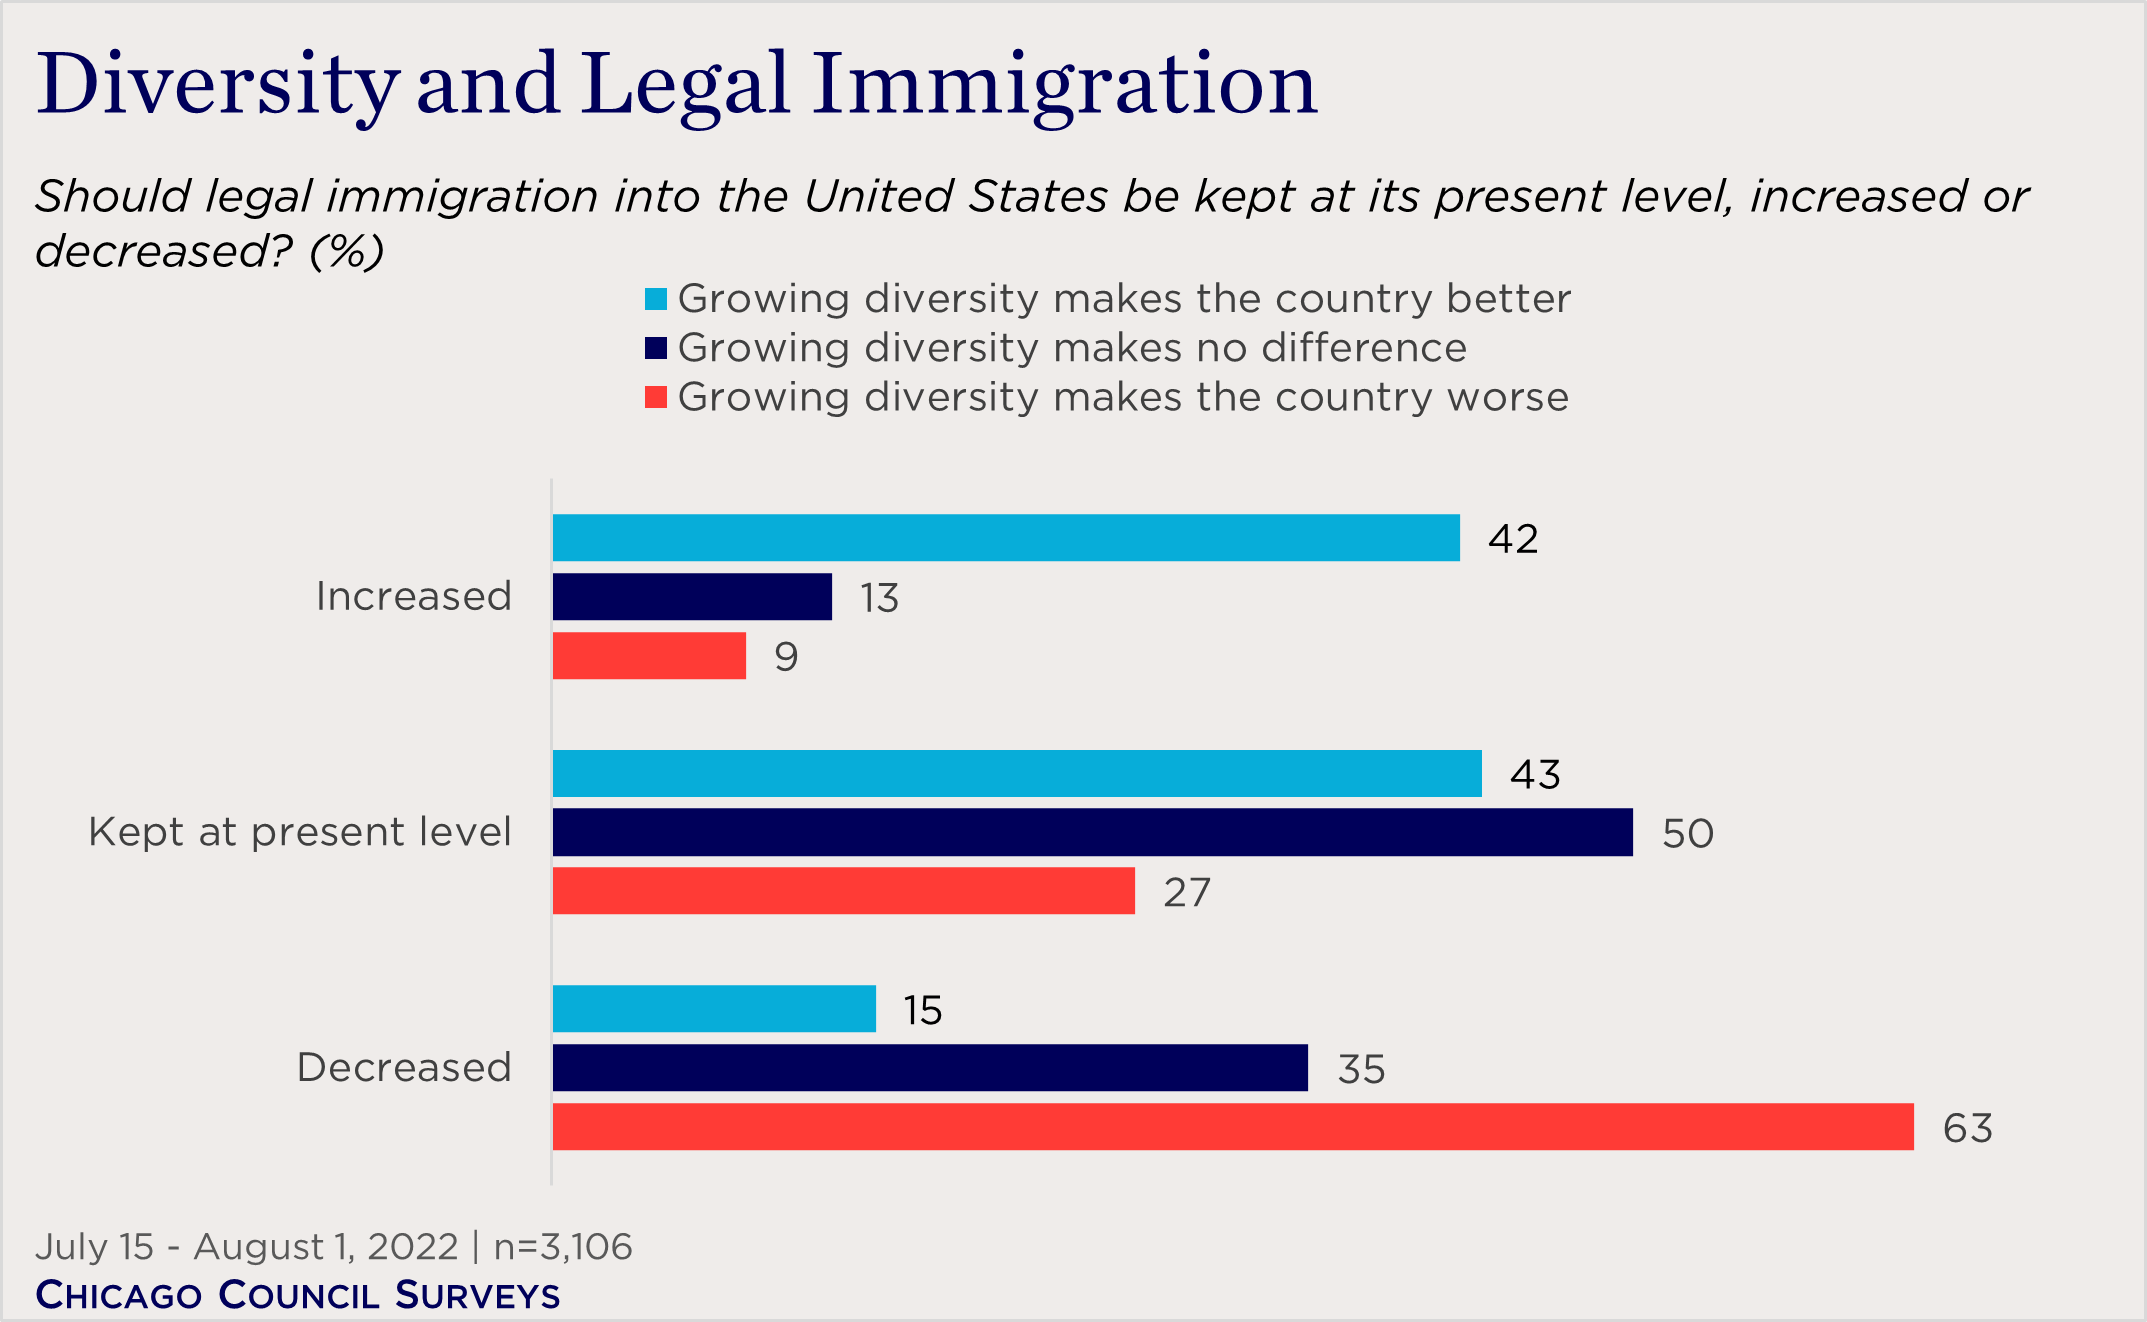 "bar chart showing views on diversity and legal immigration"